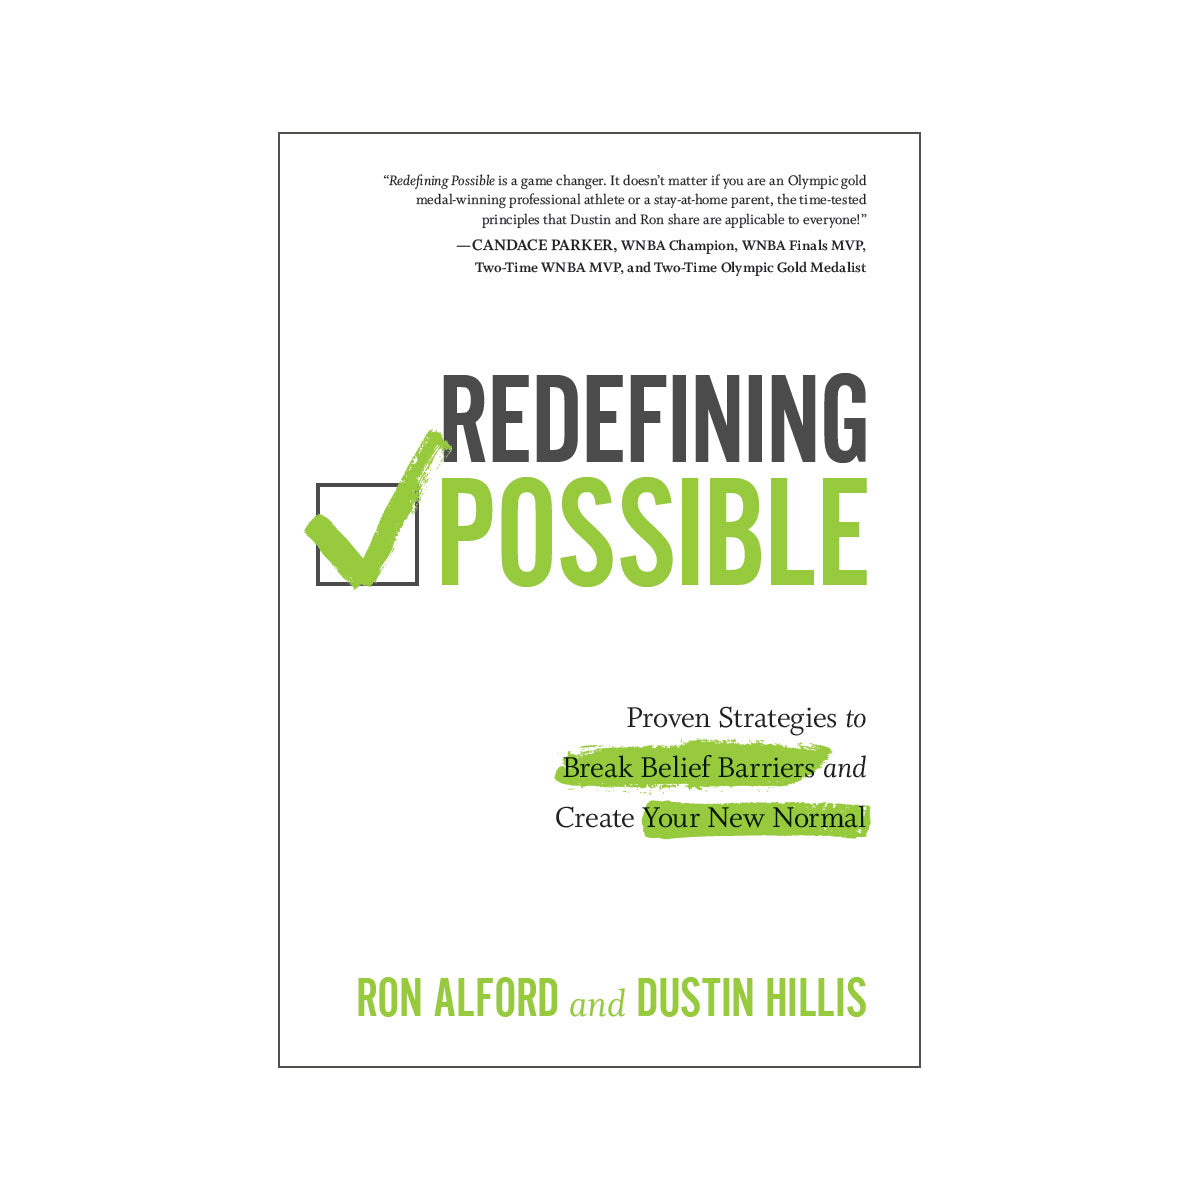 Redefining Possible: Proven Strategies to Break Belief Barriers and Create Your New Normal